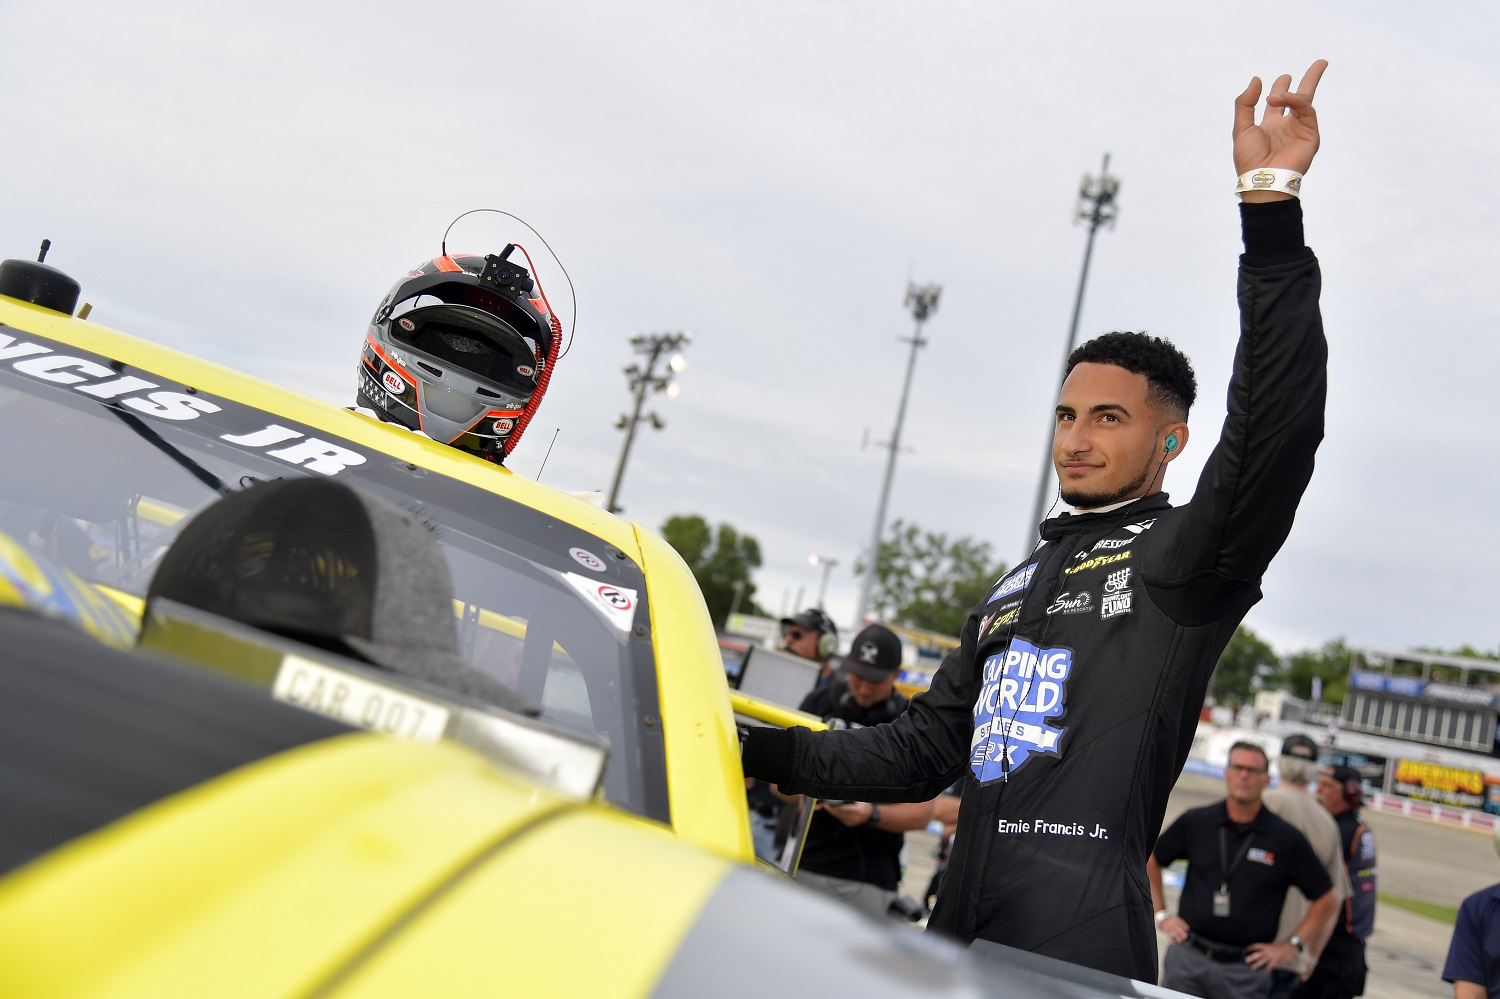 Ernie Francis Jr. waves to fans before climbing into his car during the Camping World Superstar Racing Experience (SRX) event at Slinger Speedway on July 10, 2021, in Slinger, Wisconsin.